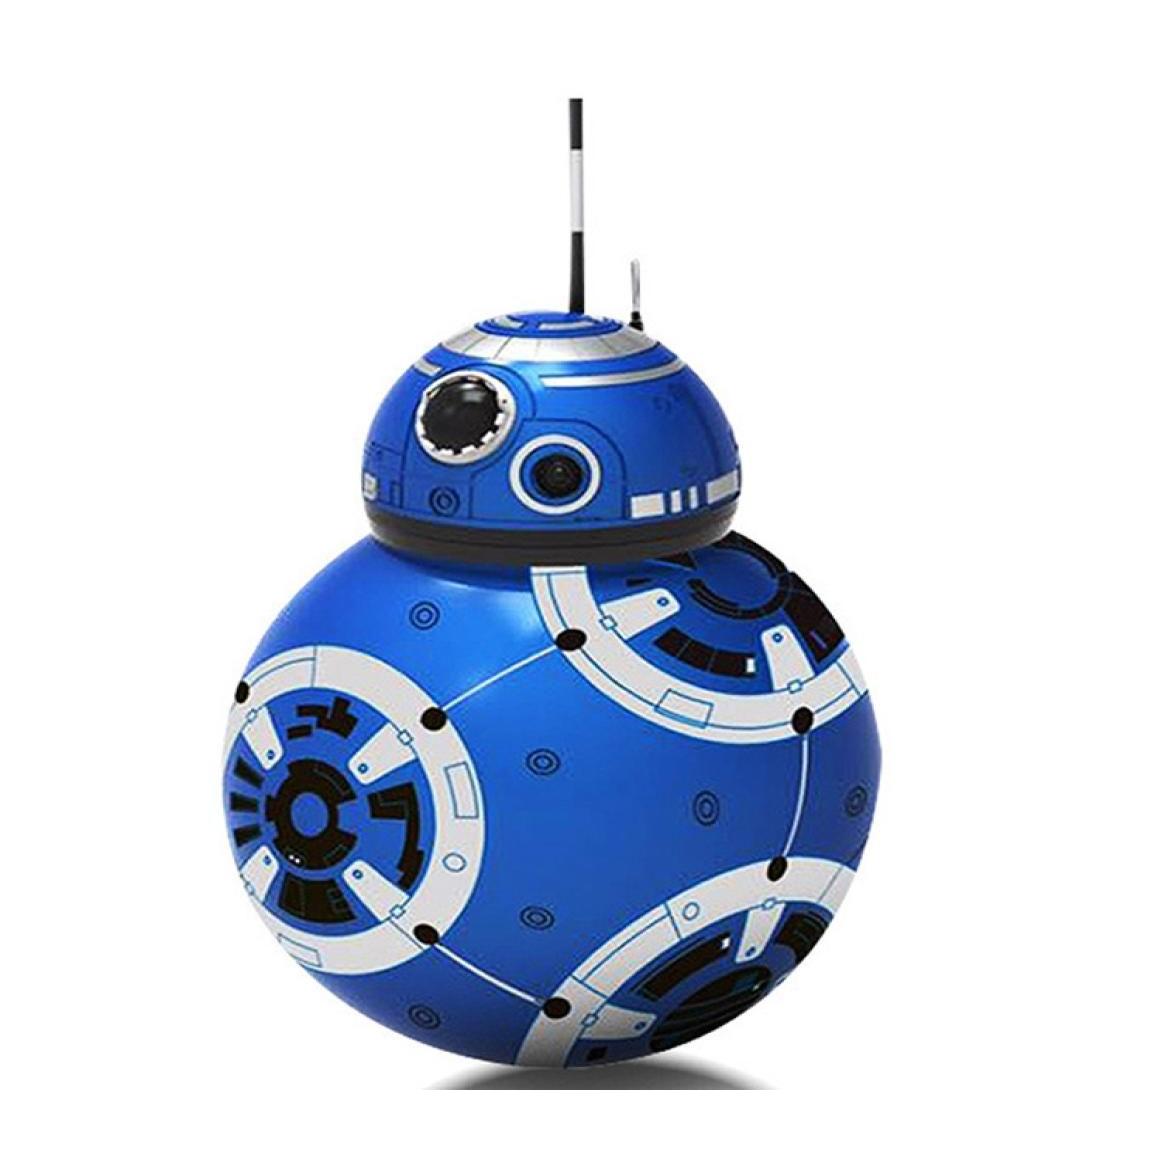 Electric/RC Animals RC BB8 Droid Robot Ball Intelligent Action Kid Toy Gift With Sound 24g Remote Control8255567 Drop Leverans Toys DHSQL